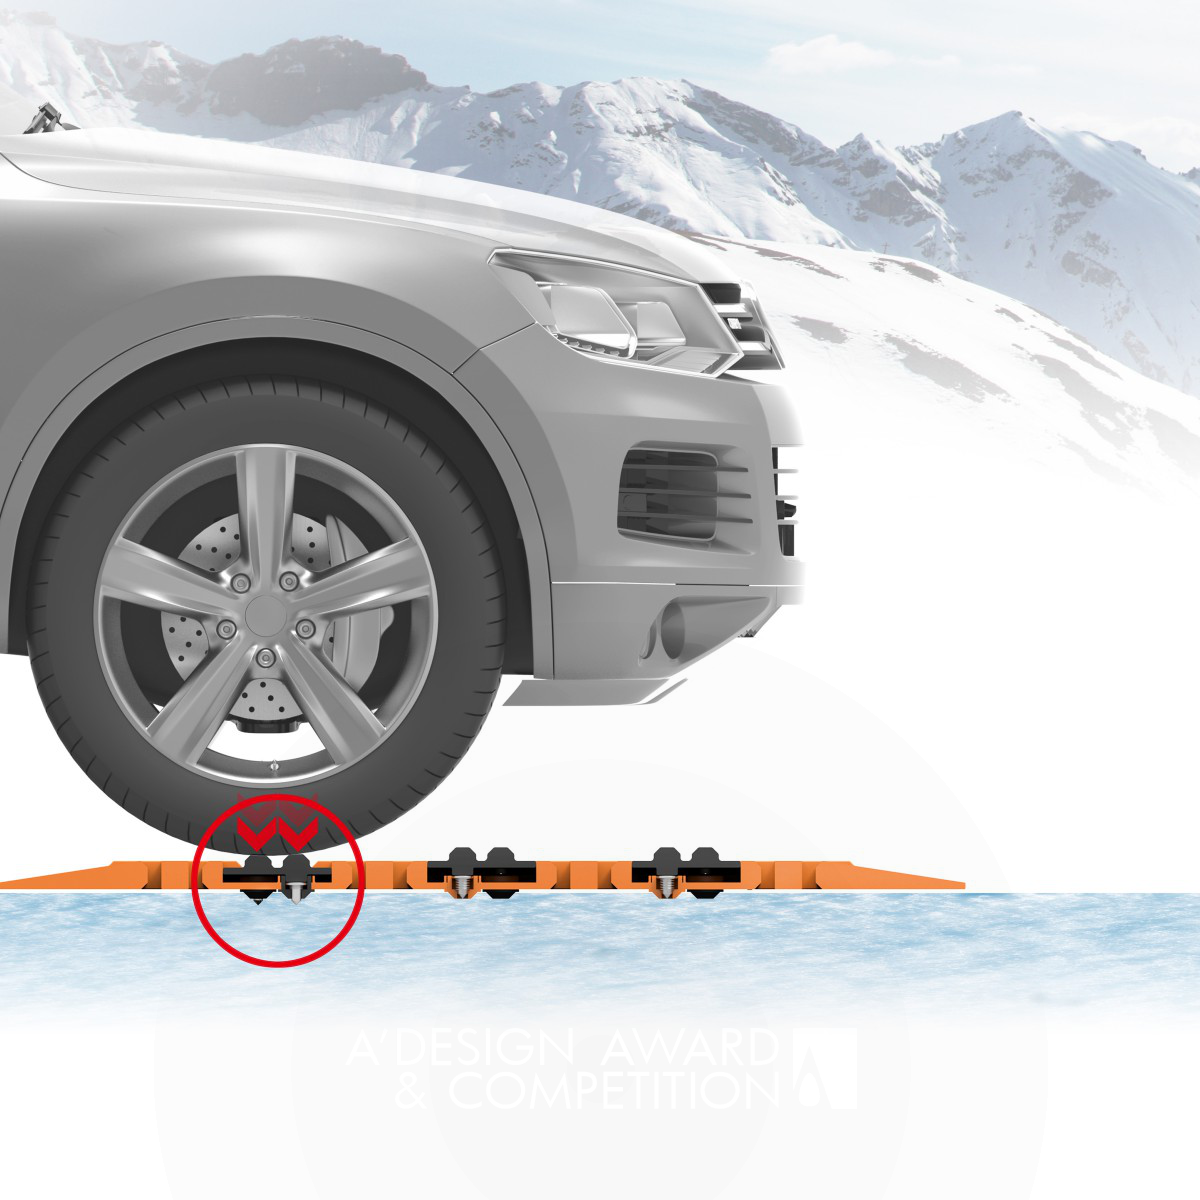 Portable TPR Car-rescue-track Help drivers safely drive over by Xuesong Li